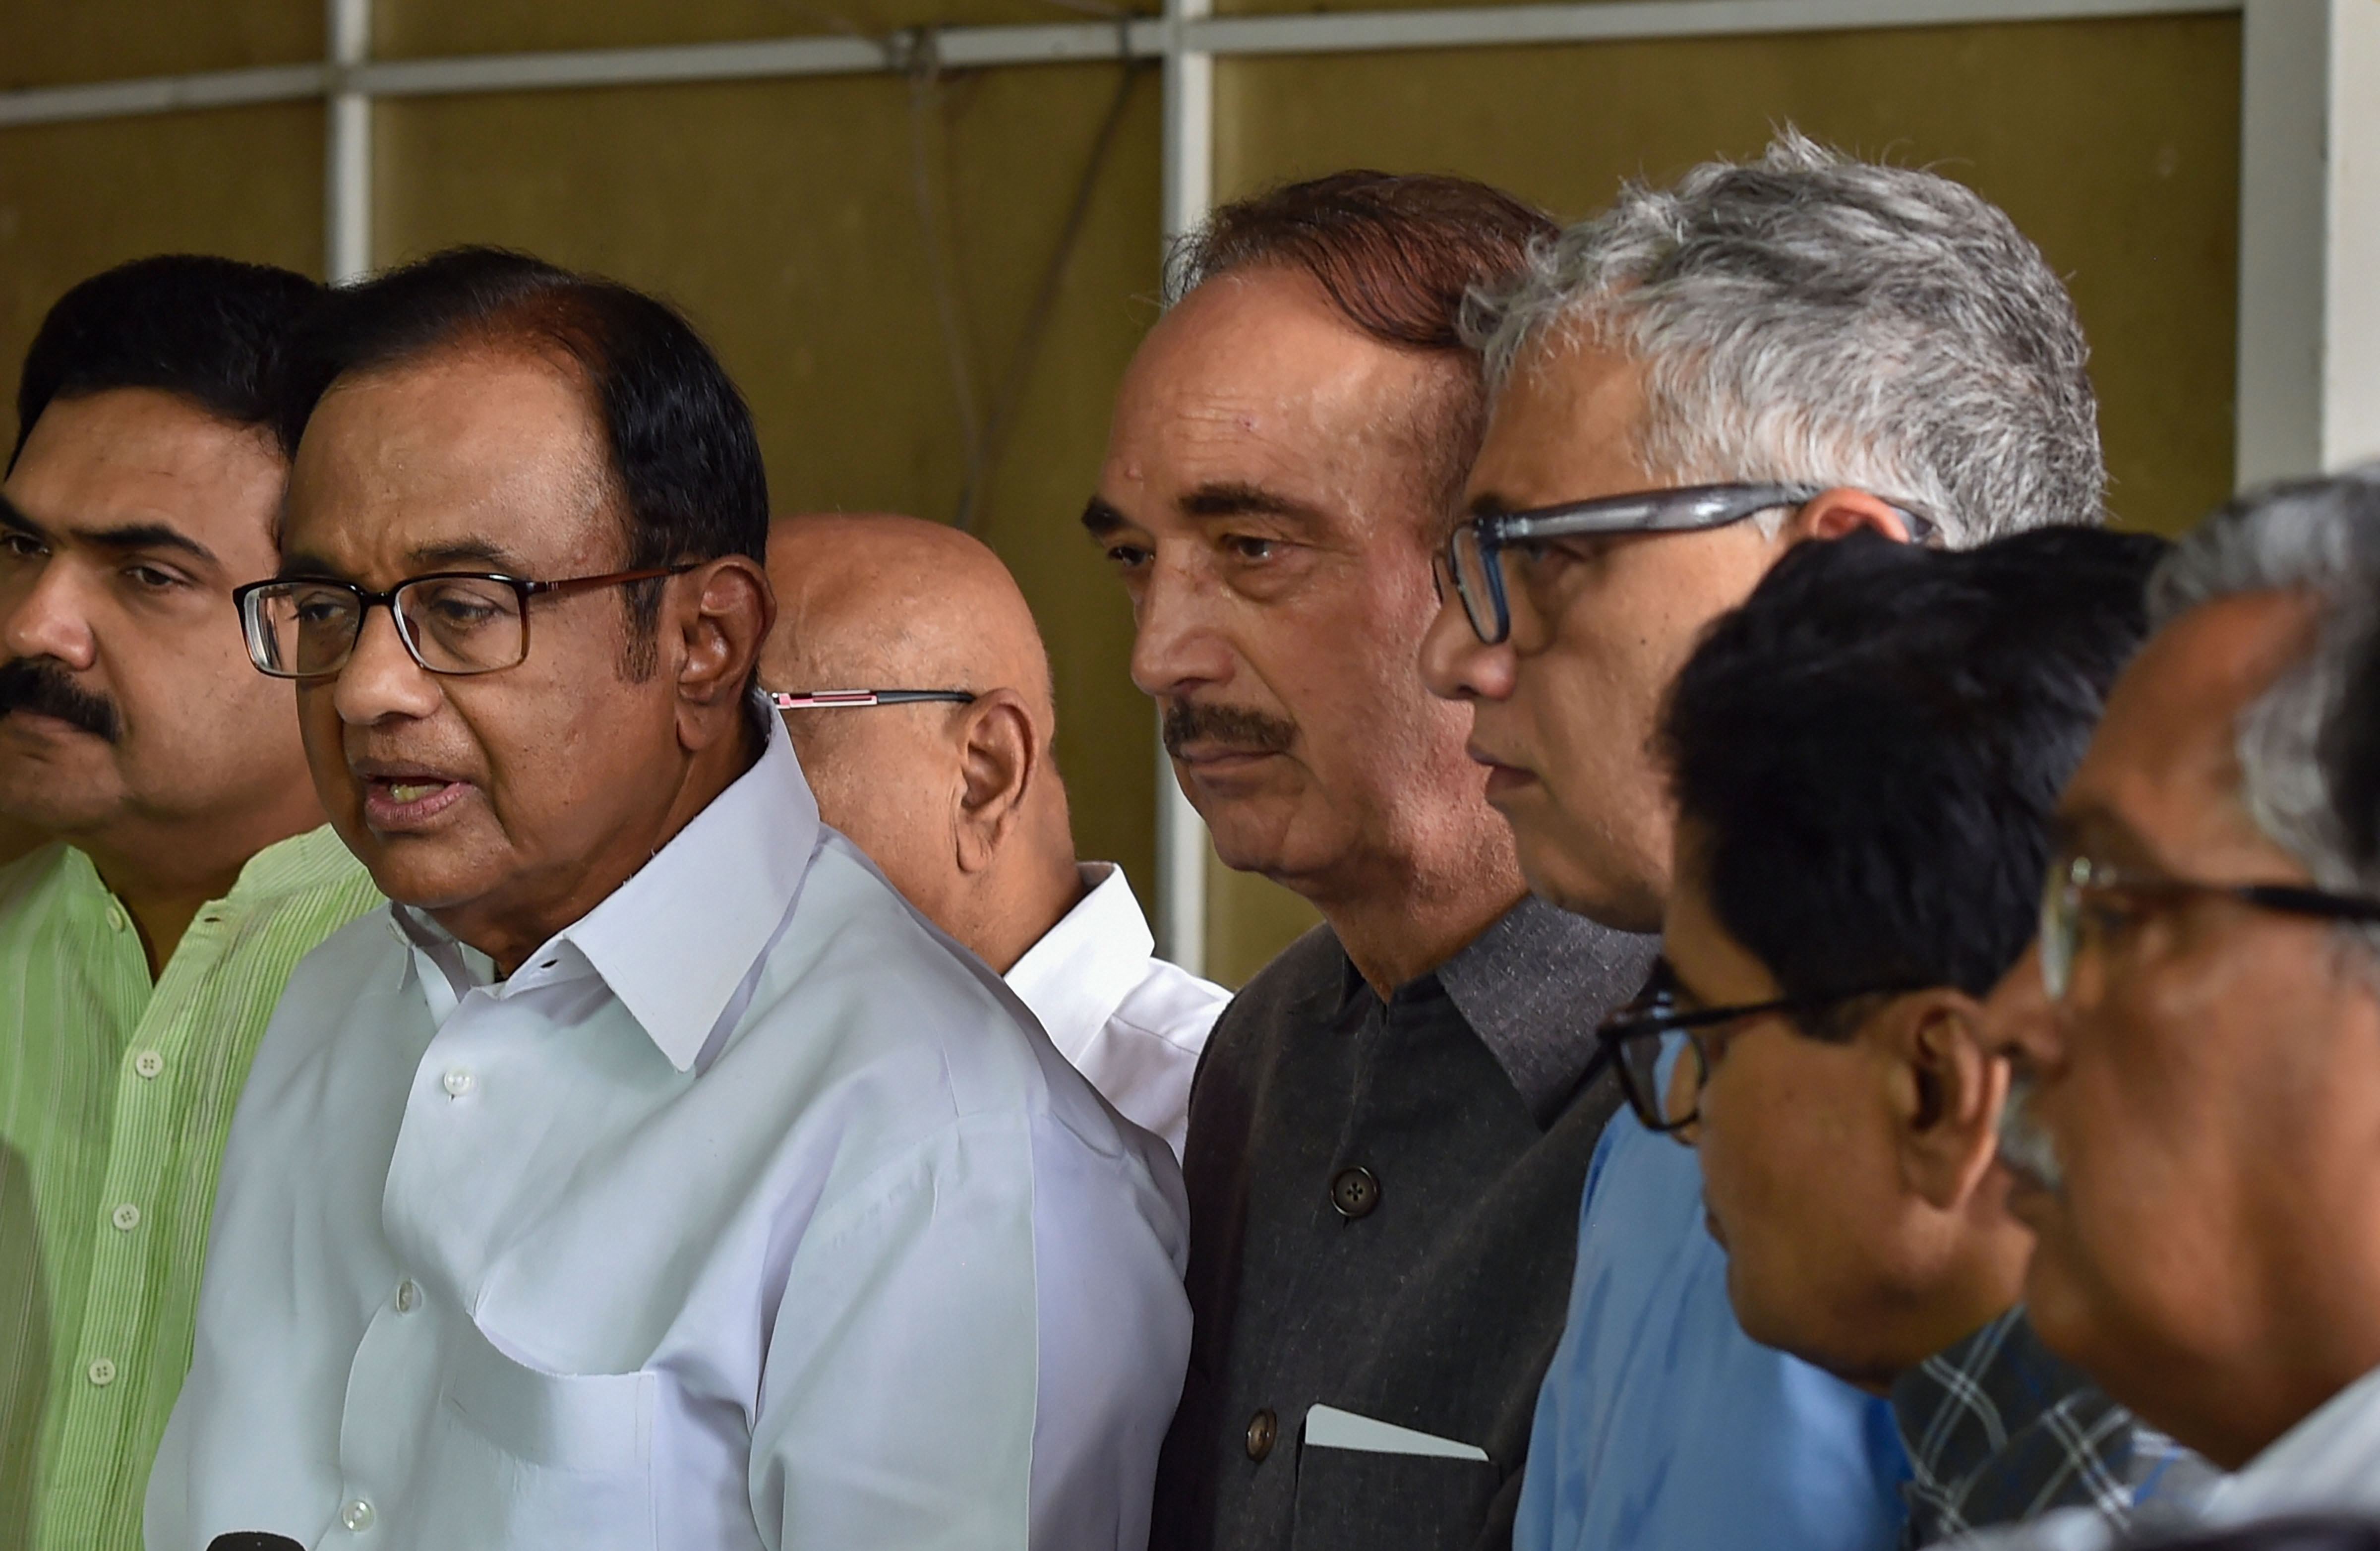 Ghulam Nabi Azad, leader of Opposition in the Rajya Sabha (centre, in black) and others look on as Congress leader P. Chidambaram (to his right) addresses the media regarding the Union government's move on Article 370, at the Parliament in New Delhi on Monday, August 5, 2019.